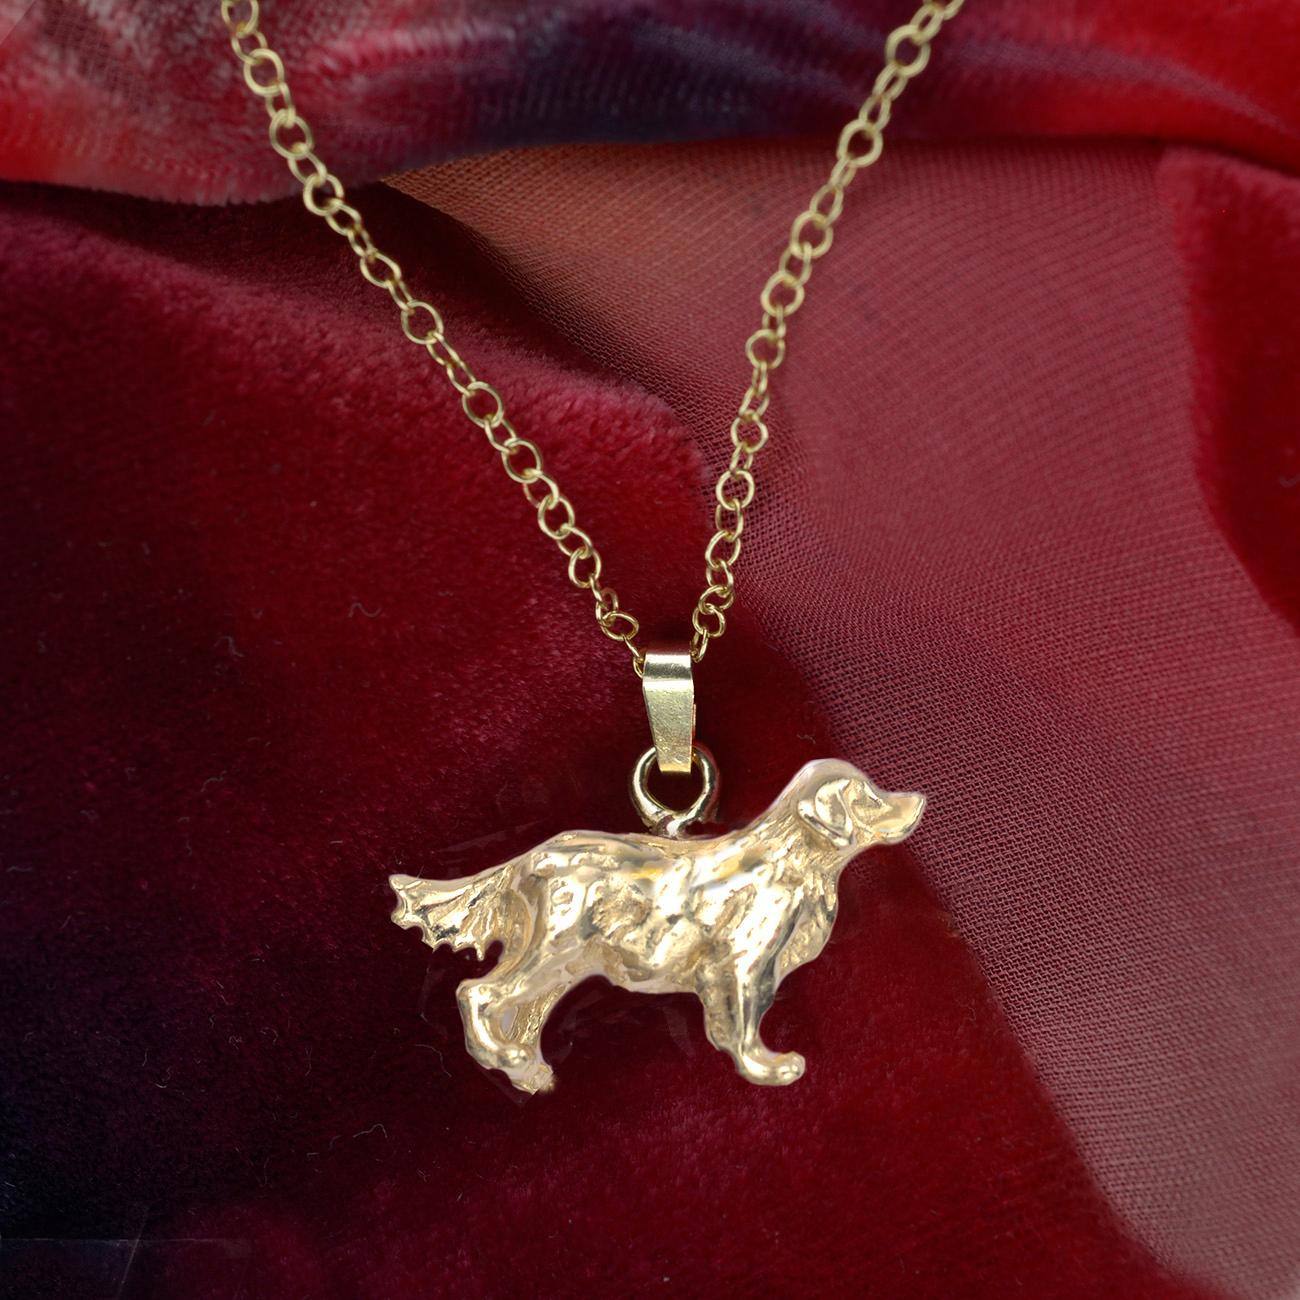 A highly detailed solid 9 carat Gold Retriever Pendant with an 18